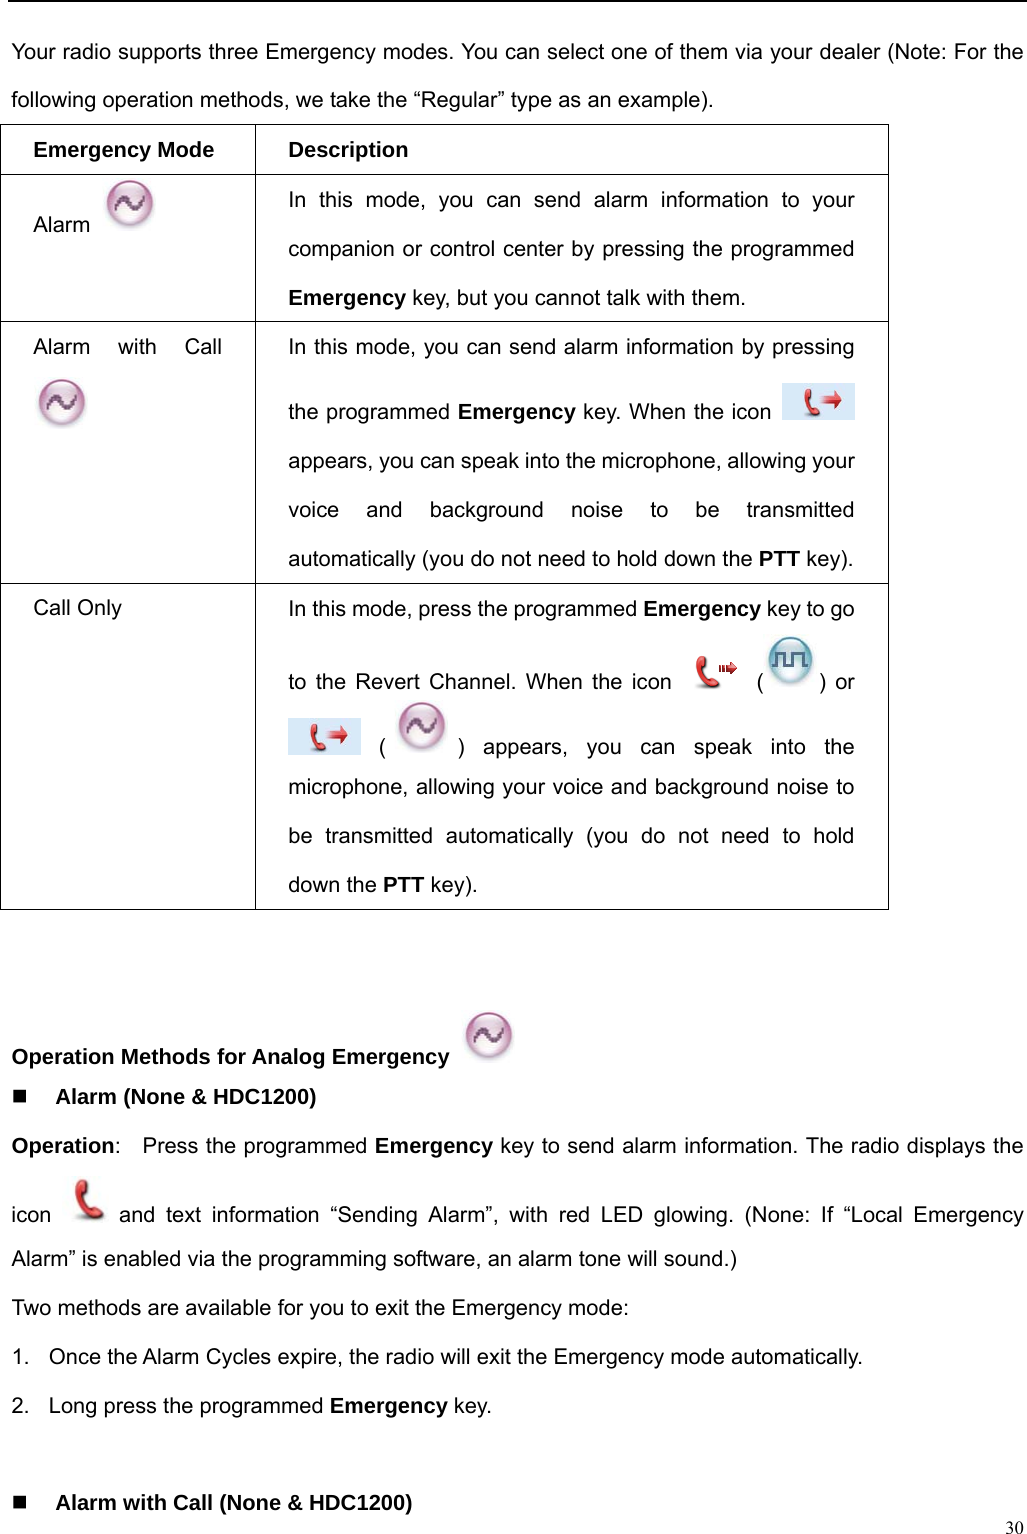                                                                                                            Your radio supports three Emergency modes. You can select one of them via your dealer (Note: For the following operation methods, we take the “Regular” type as an example). Emergency Mode Description Alarm   In this mode, you can send alarm information to your companion or control center by pressing the programmed Emergency key, but you cannot talk with them. Alarm with Call  In this mode, you can send alarm information by pressing the programmed Emergency key. When the icon   appears, you can speak into the microphone, allowing your voice and background noise to be transmitted automatically (you do not need to hold down the PTT key). Call Only In this mode, press the programmed Emergency key to go to the Revert Channel. When the icon   ( ) or  () appears, you can speak into the microphone, allowing your voice and background noise to be transmitted automatically (you do not need to hold down the PTT key).     Operation Methods for Analog Emergency   Alarm (None &amp; HDC1200) Operation:    Press the programmed Emergency key to send alarm information. The radio displays the icon   and text information “Sending Alarm”, with red LED glowing. (None: If “Local Emergency Alarm” is enabled via the programming software, an alarm tone will sound.) Two methods are available for you to exit the Emergency mode: 1.  Once the Alarm Cycles expire, the radio will exit the Emergency mode automatically.   2.  Long press the programmed Emergency key.    30 Alarm with Call (None &amp; HDC1200) 